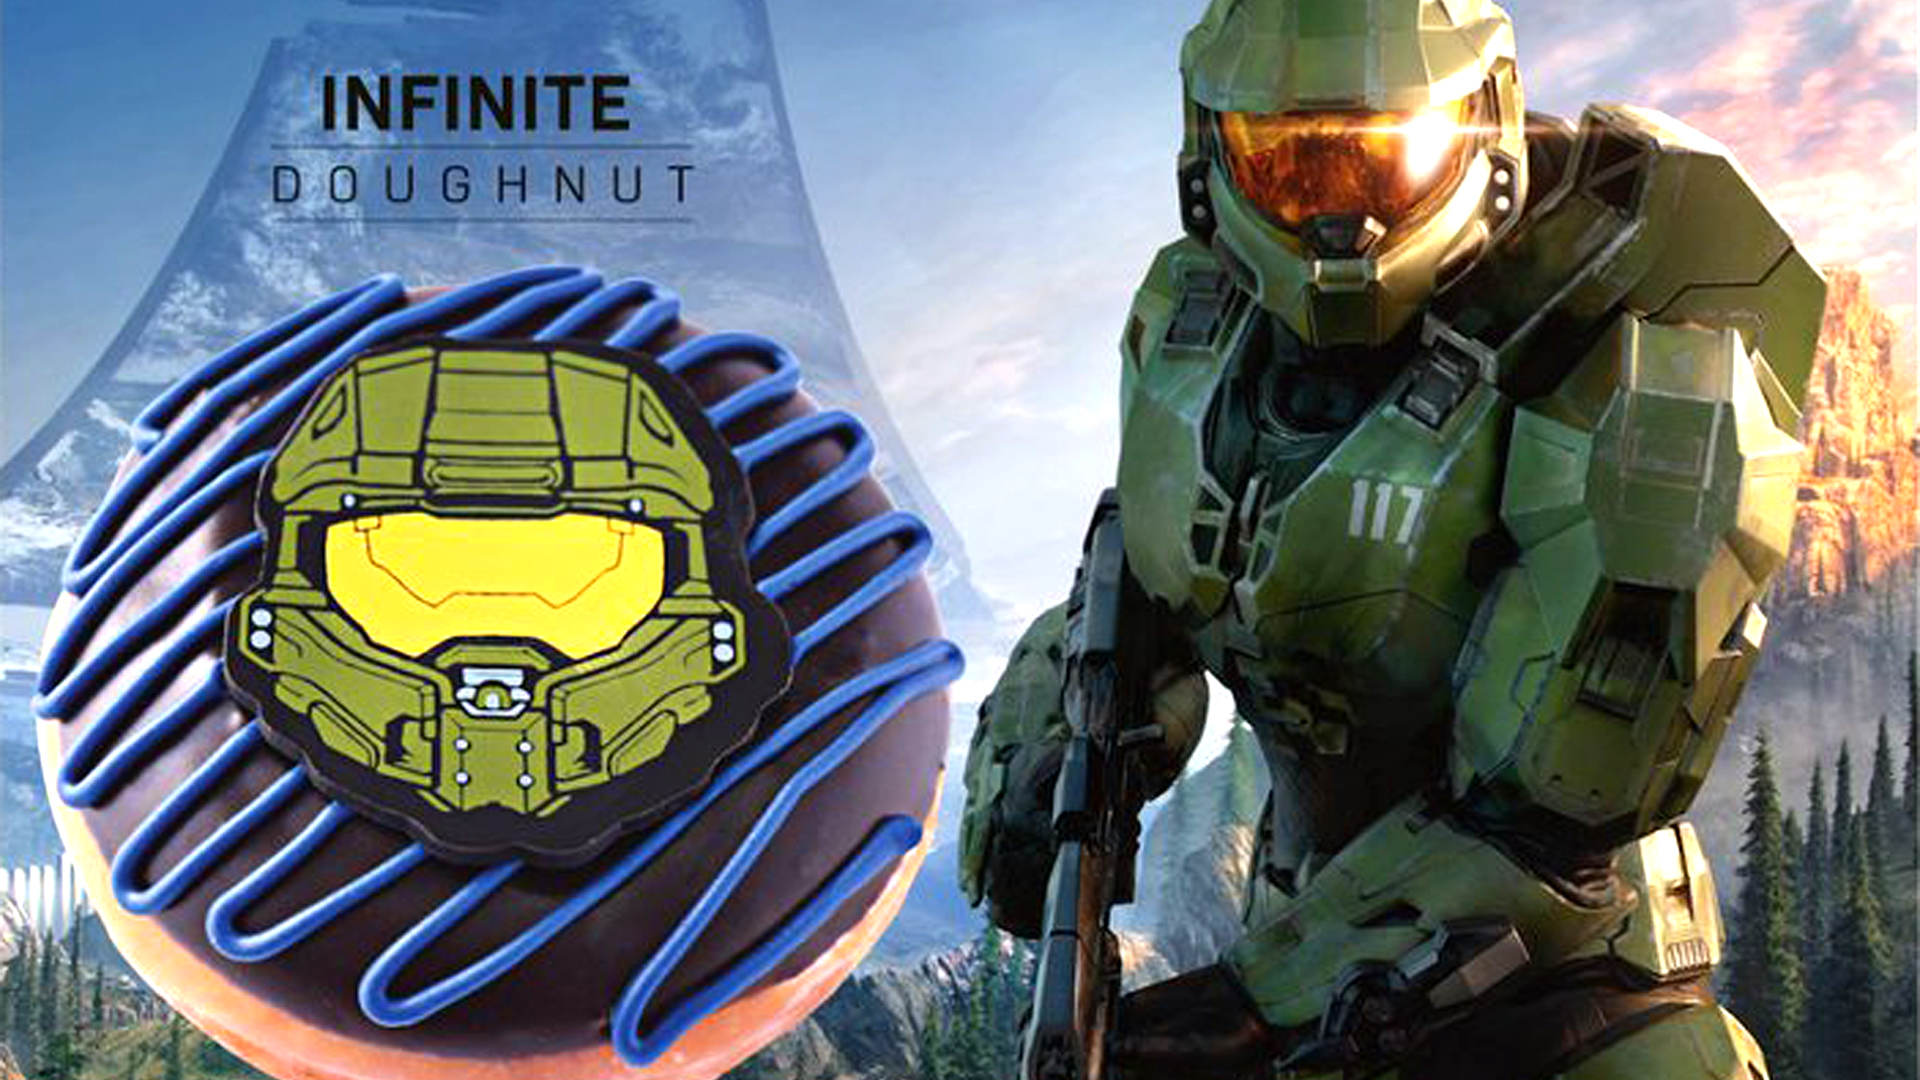 Halo Infinite’s release month may have been leaked by Xbox and Krispy Kreme